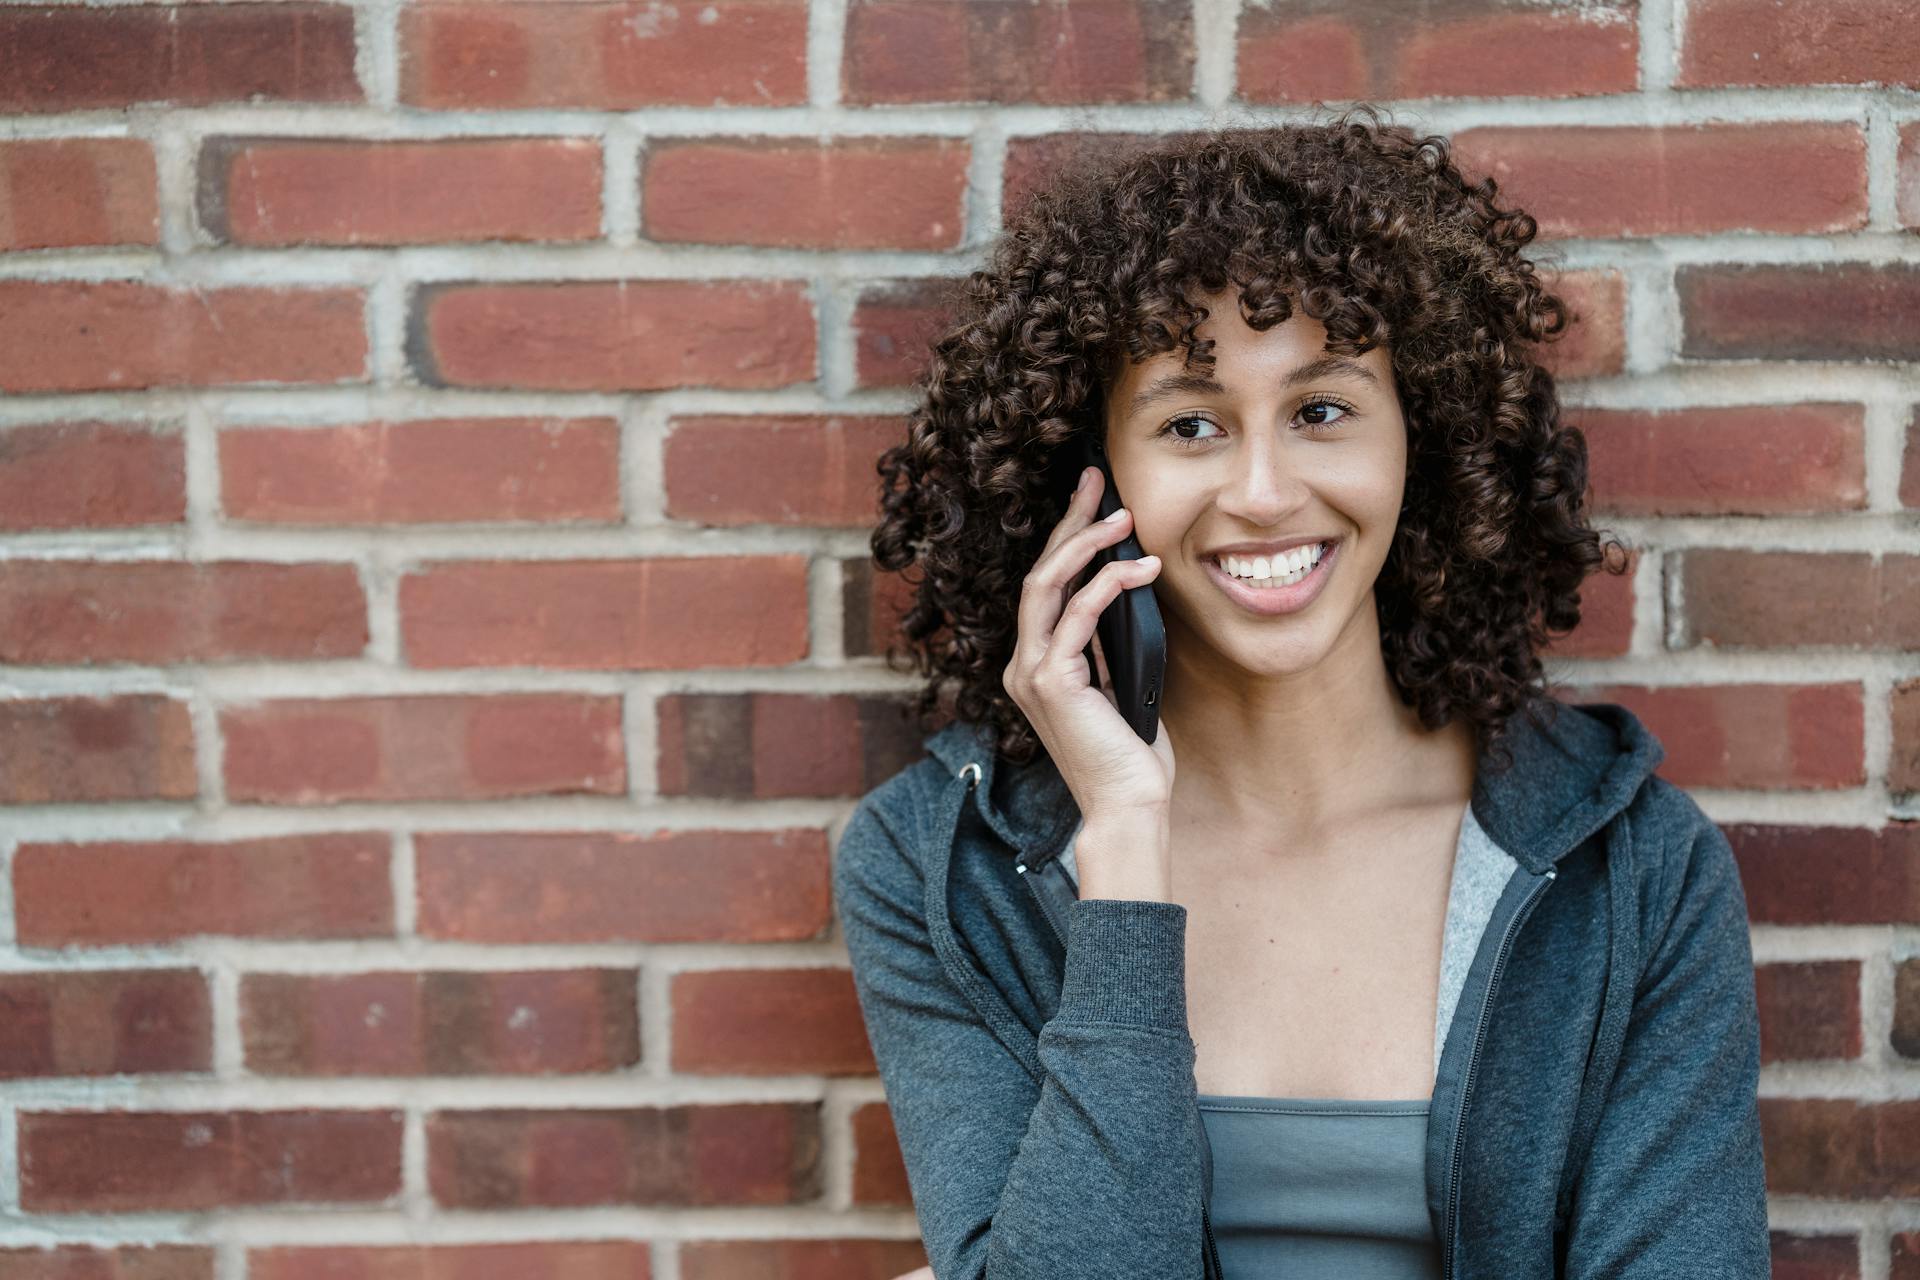 A woman smiling while on a phone call | Source: Pexels